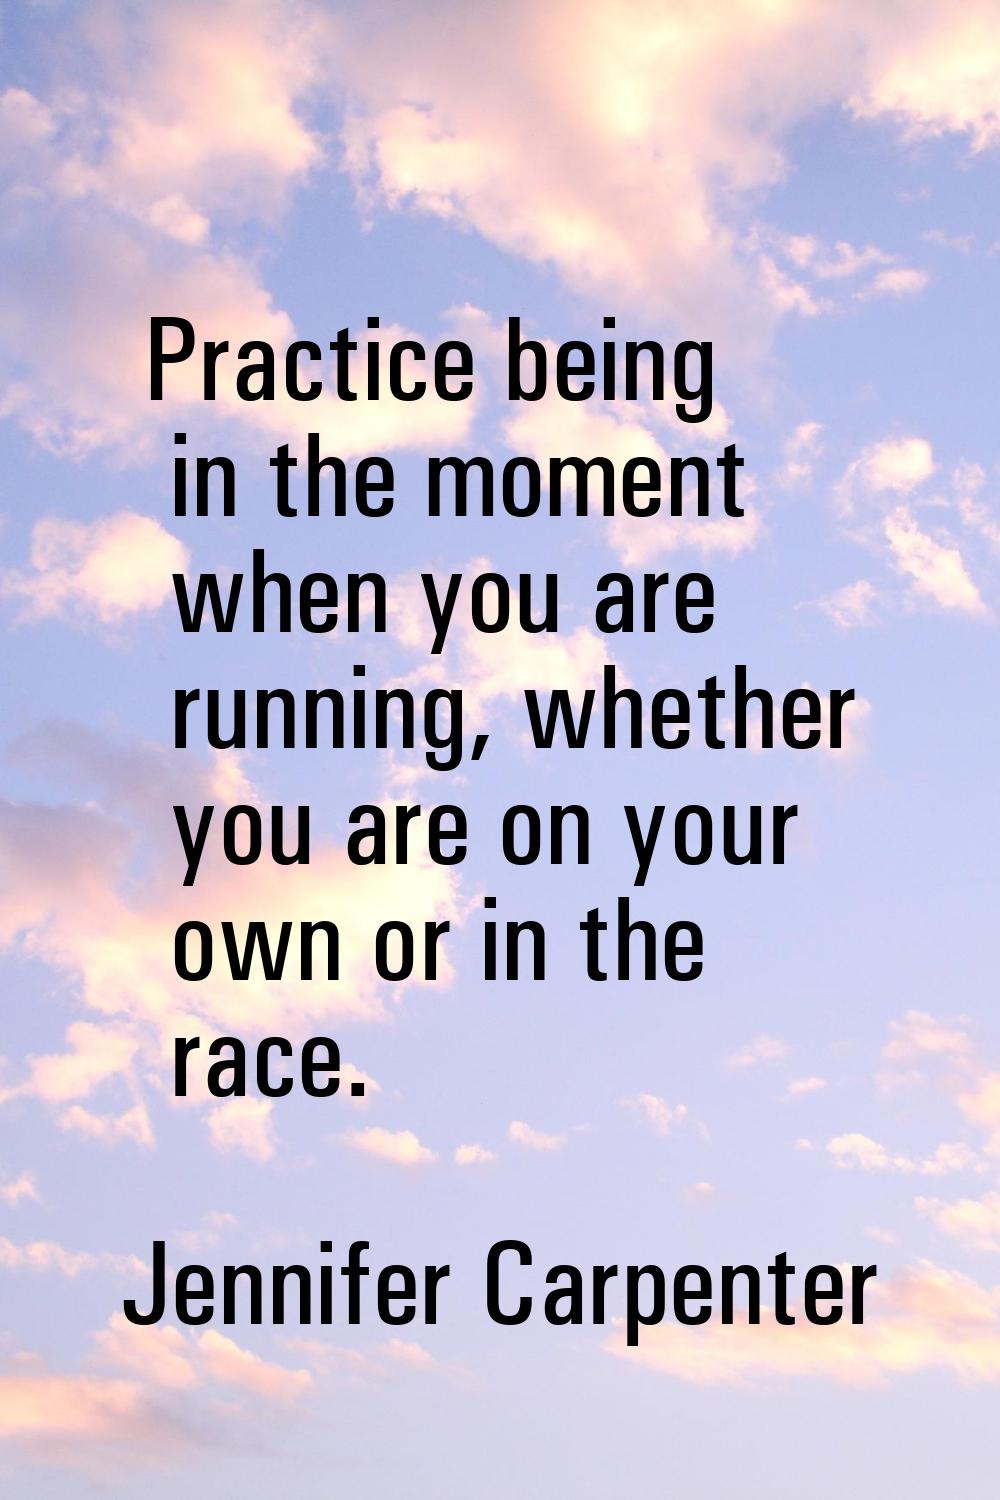 Practice being in the moment when you are running, whether you are on your own or in the race.